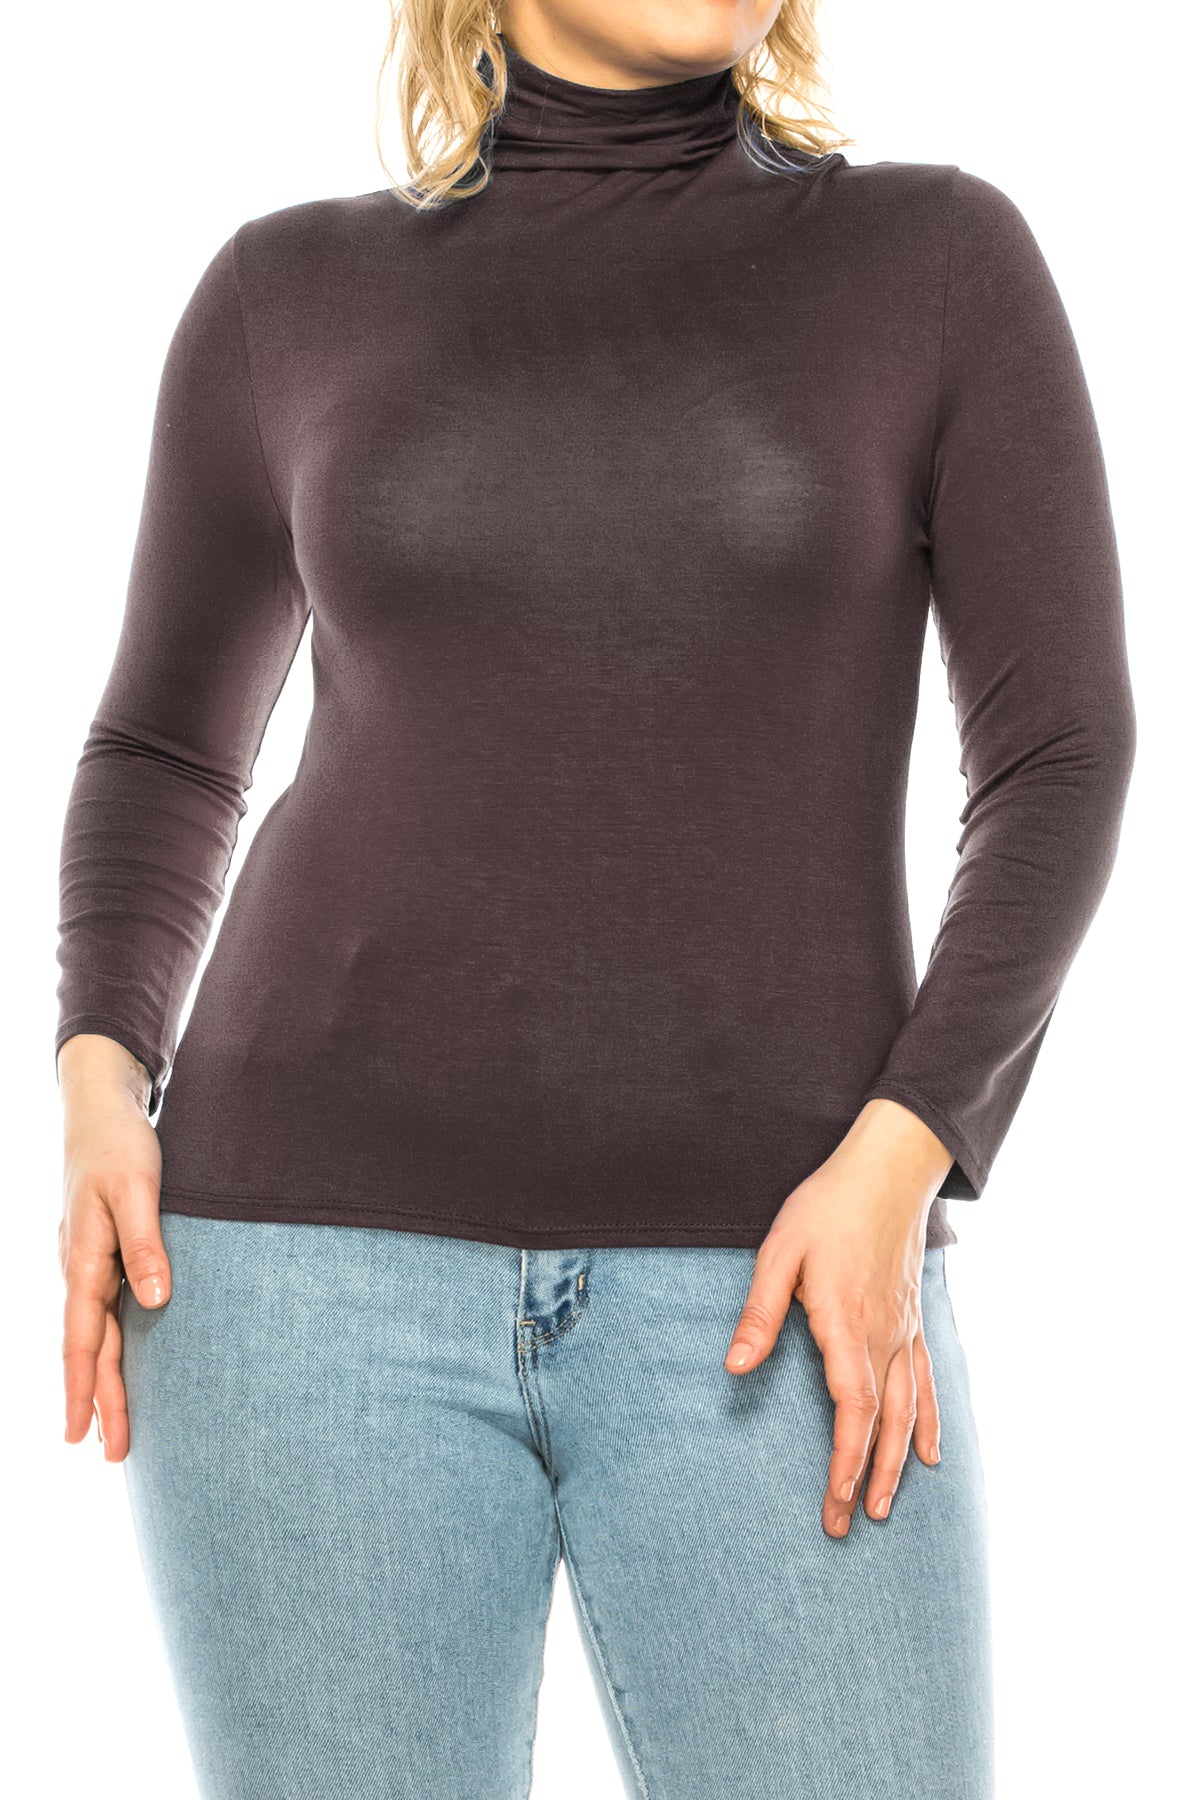 Women's Plus Size Casual Fitted Long Sleeve Solid Turtleneck Sweater Tops Shirts